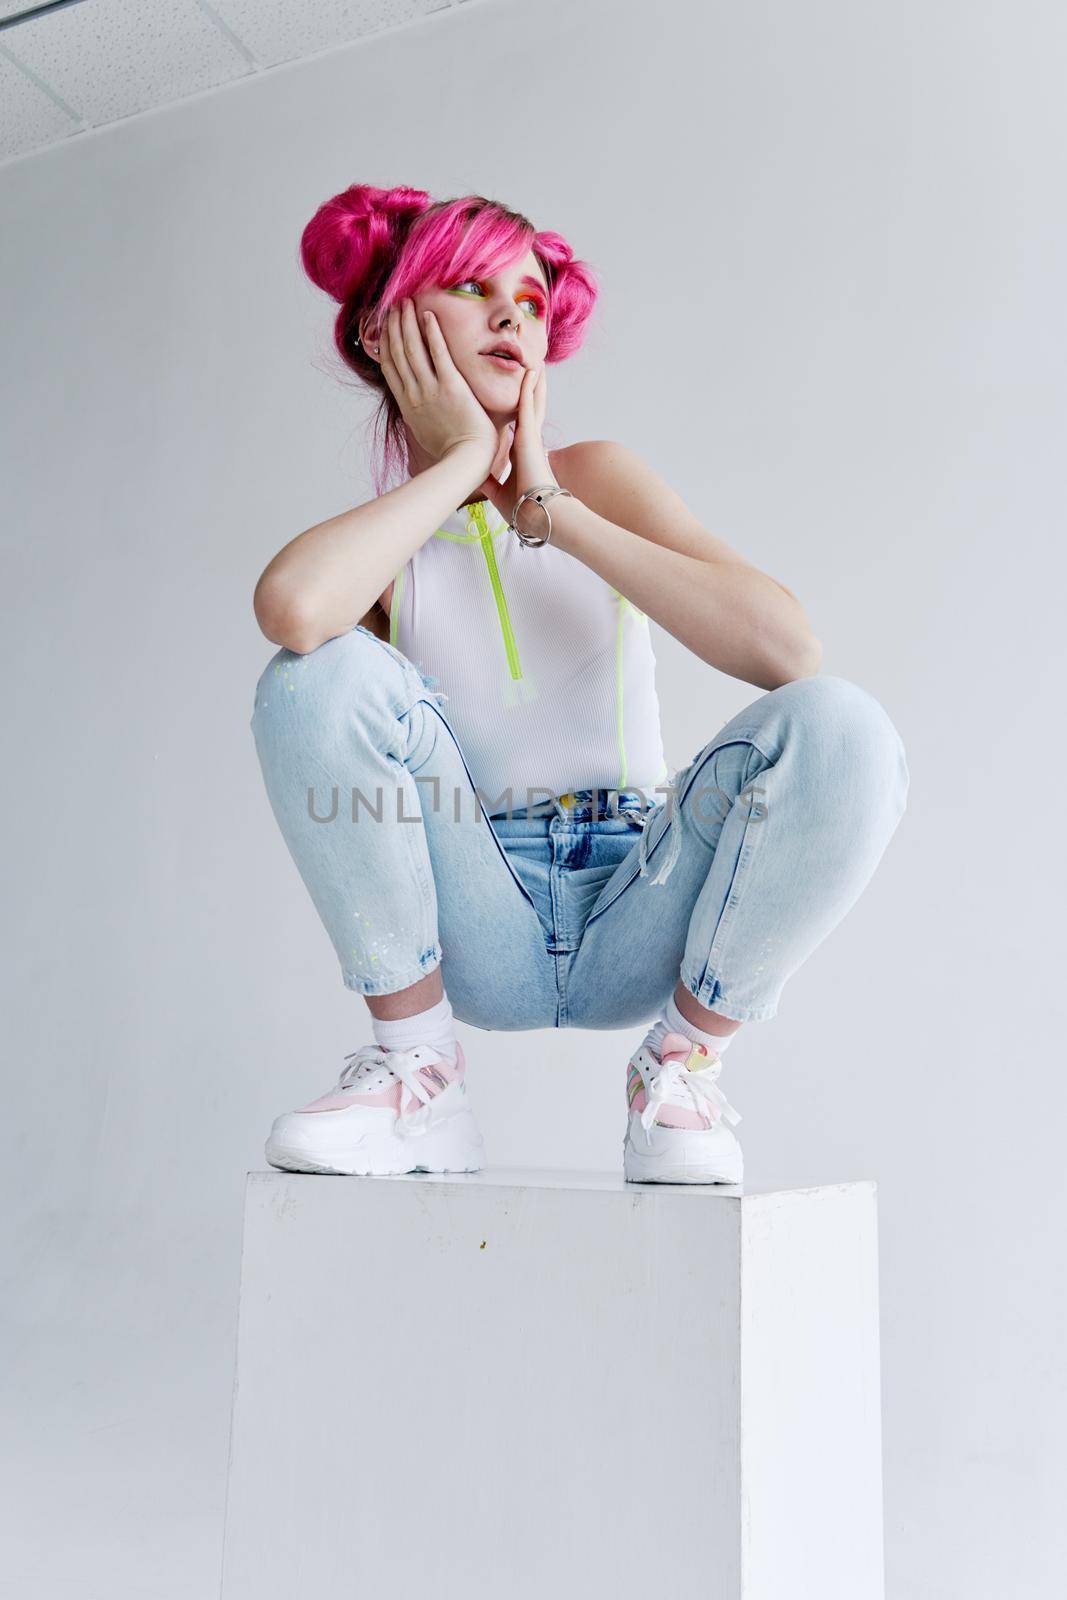 hipster woman with pink hair creative Acid style design by Vichizh